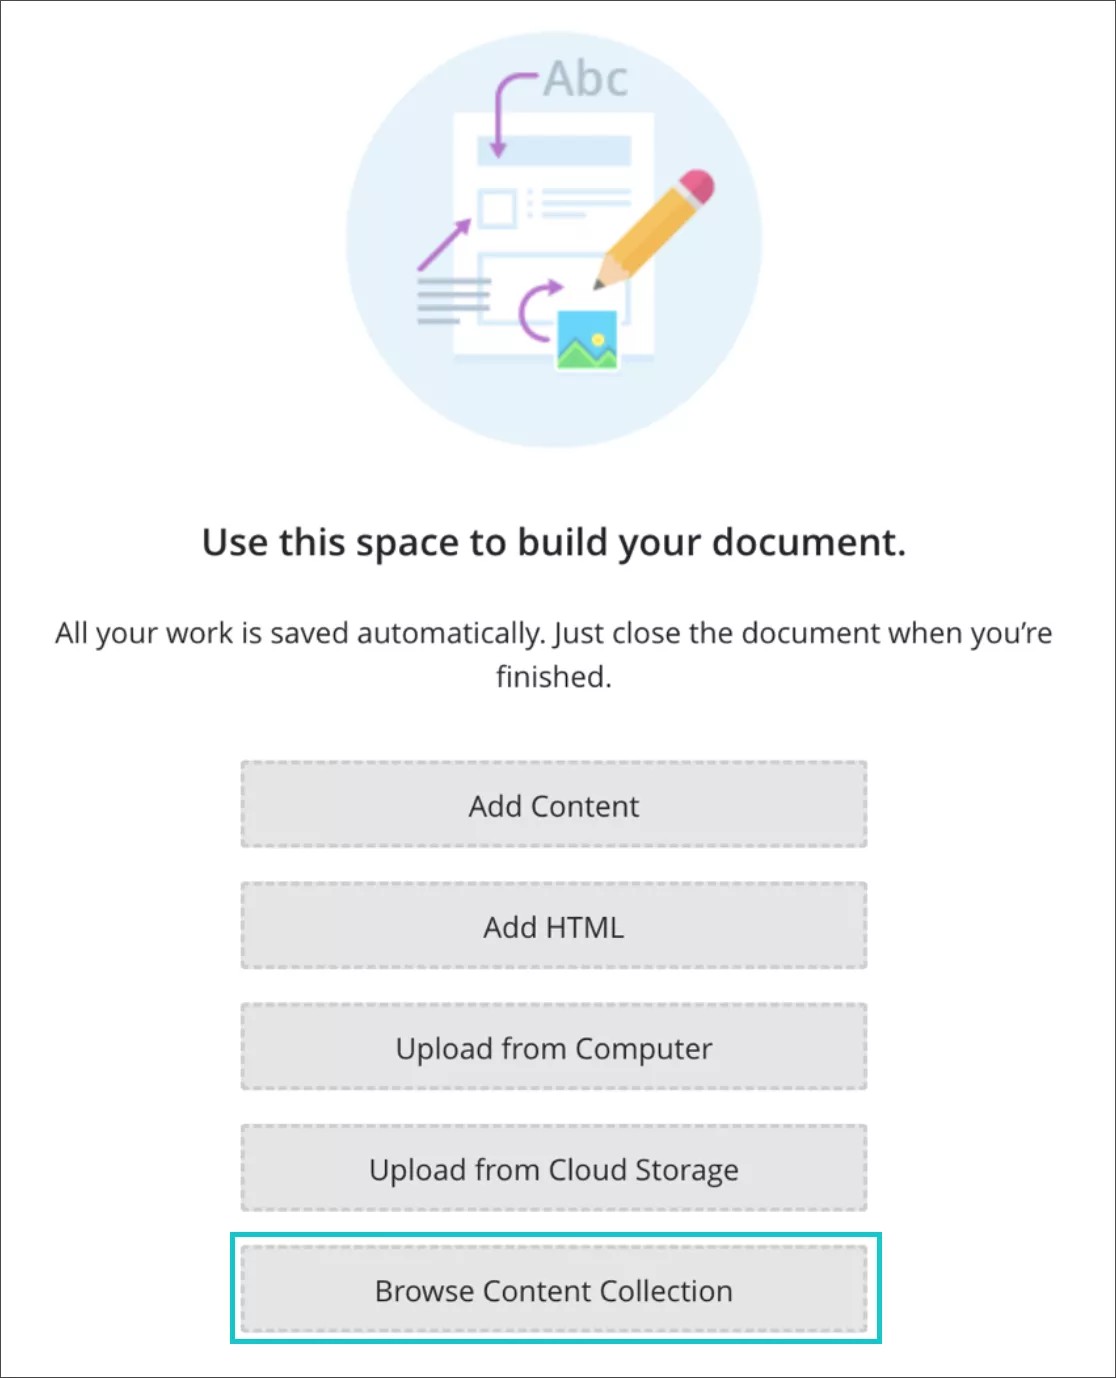 “Browse Content Collection” option in Ultra documents